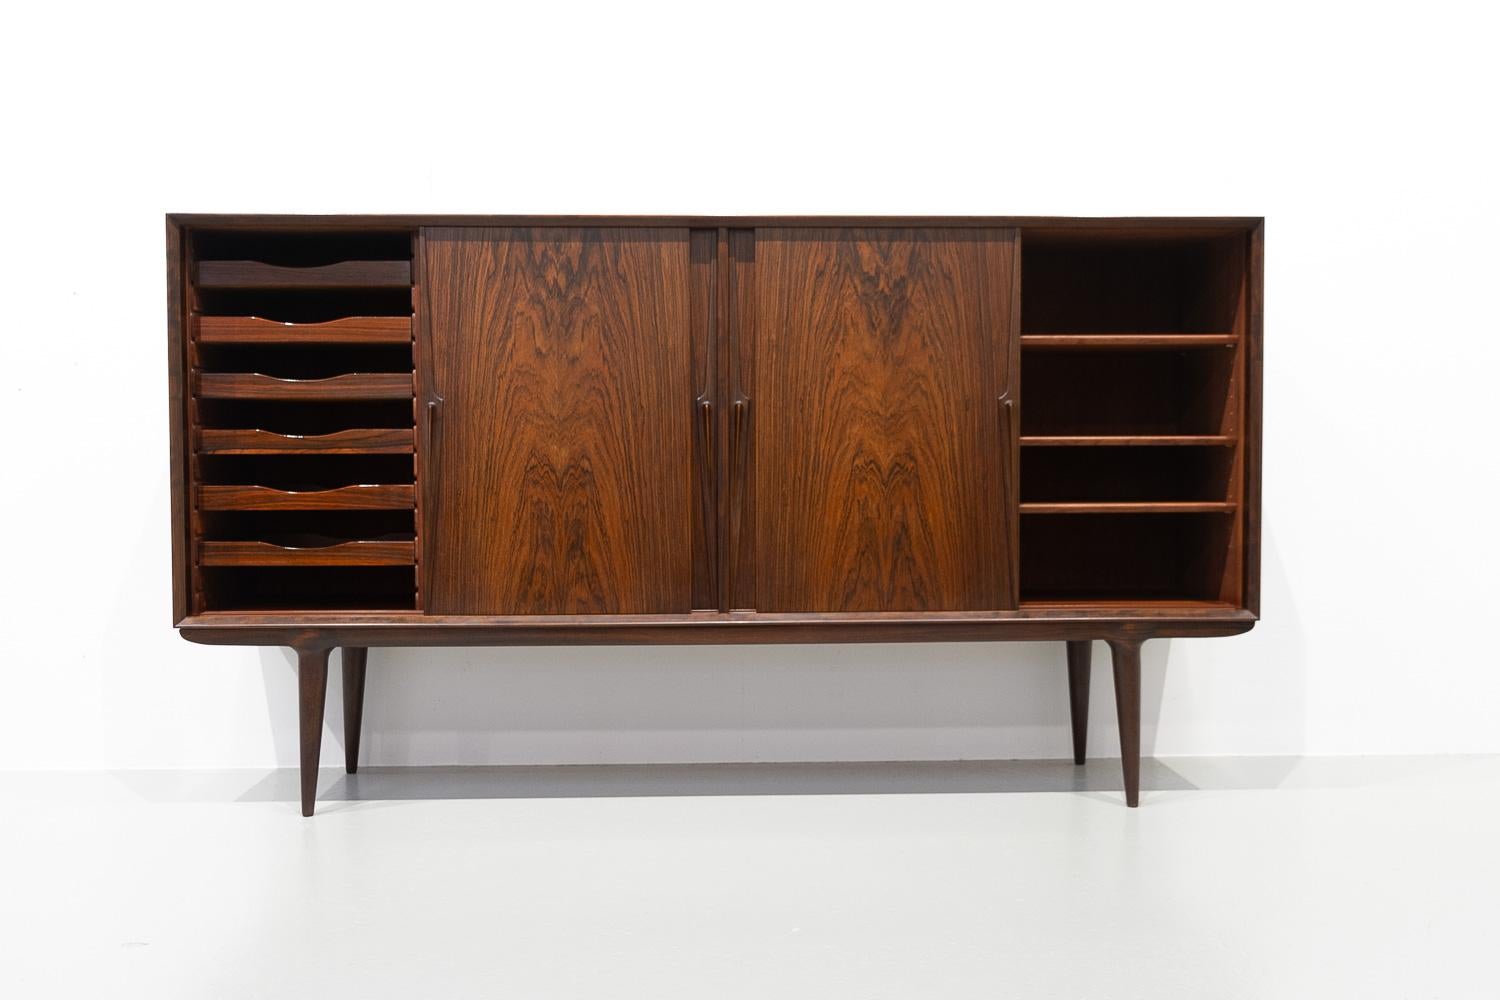 Vintage Danish Rosewood Credenza by Gunni Omann for Omann Jun, 1960s For Sale 1